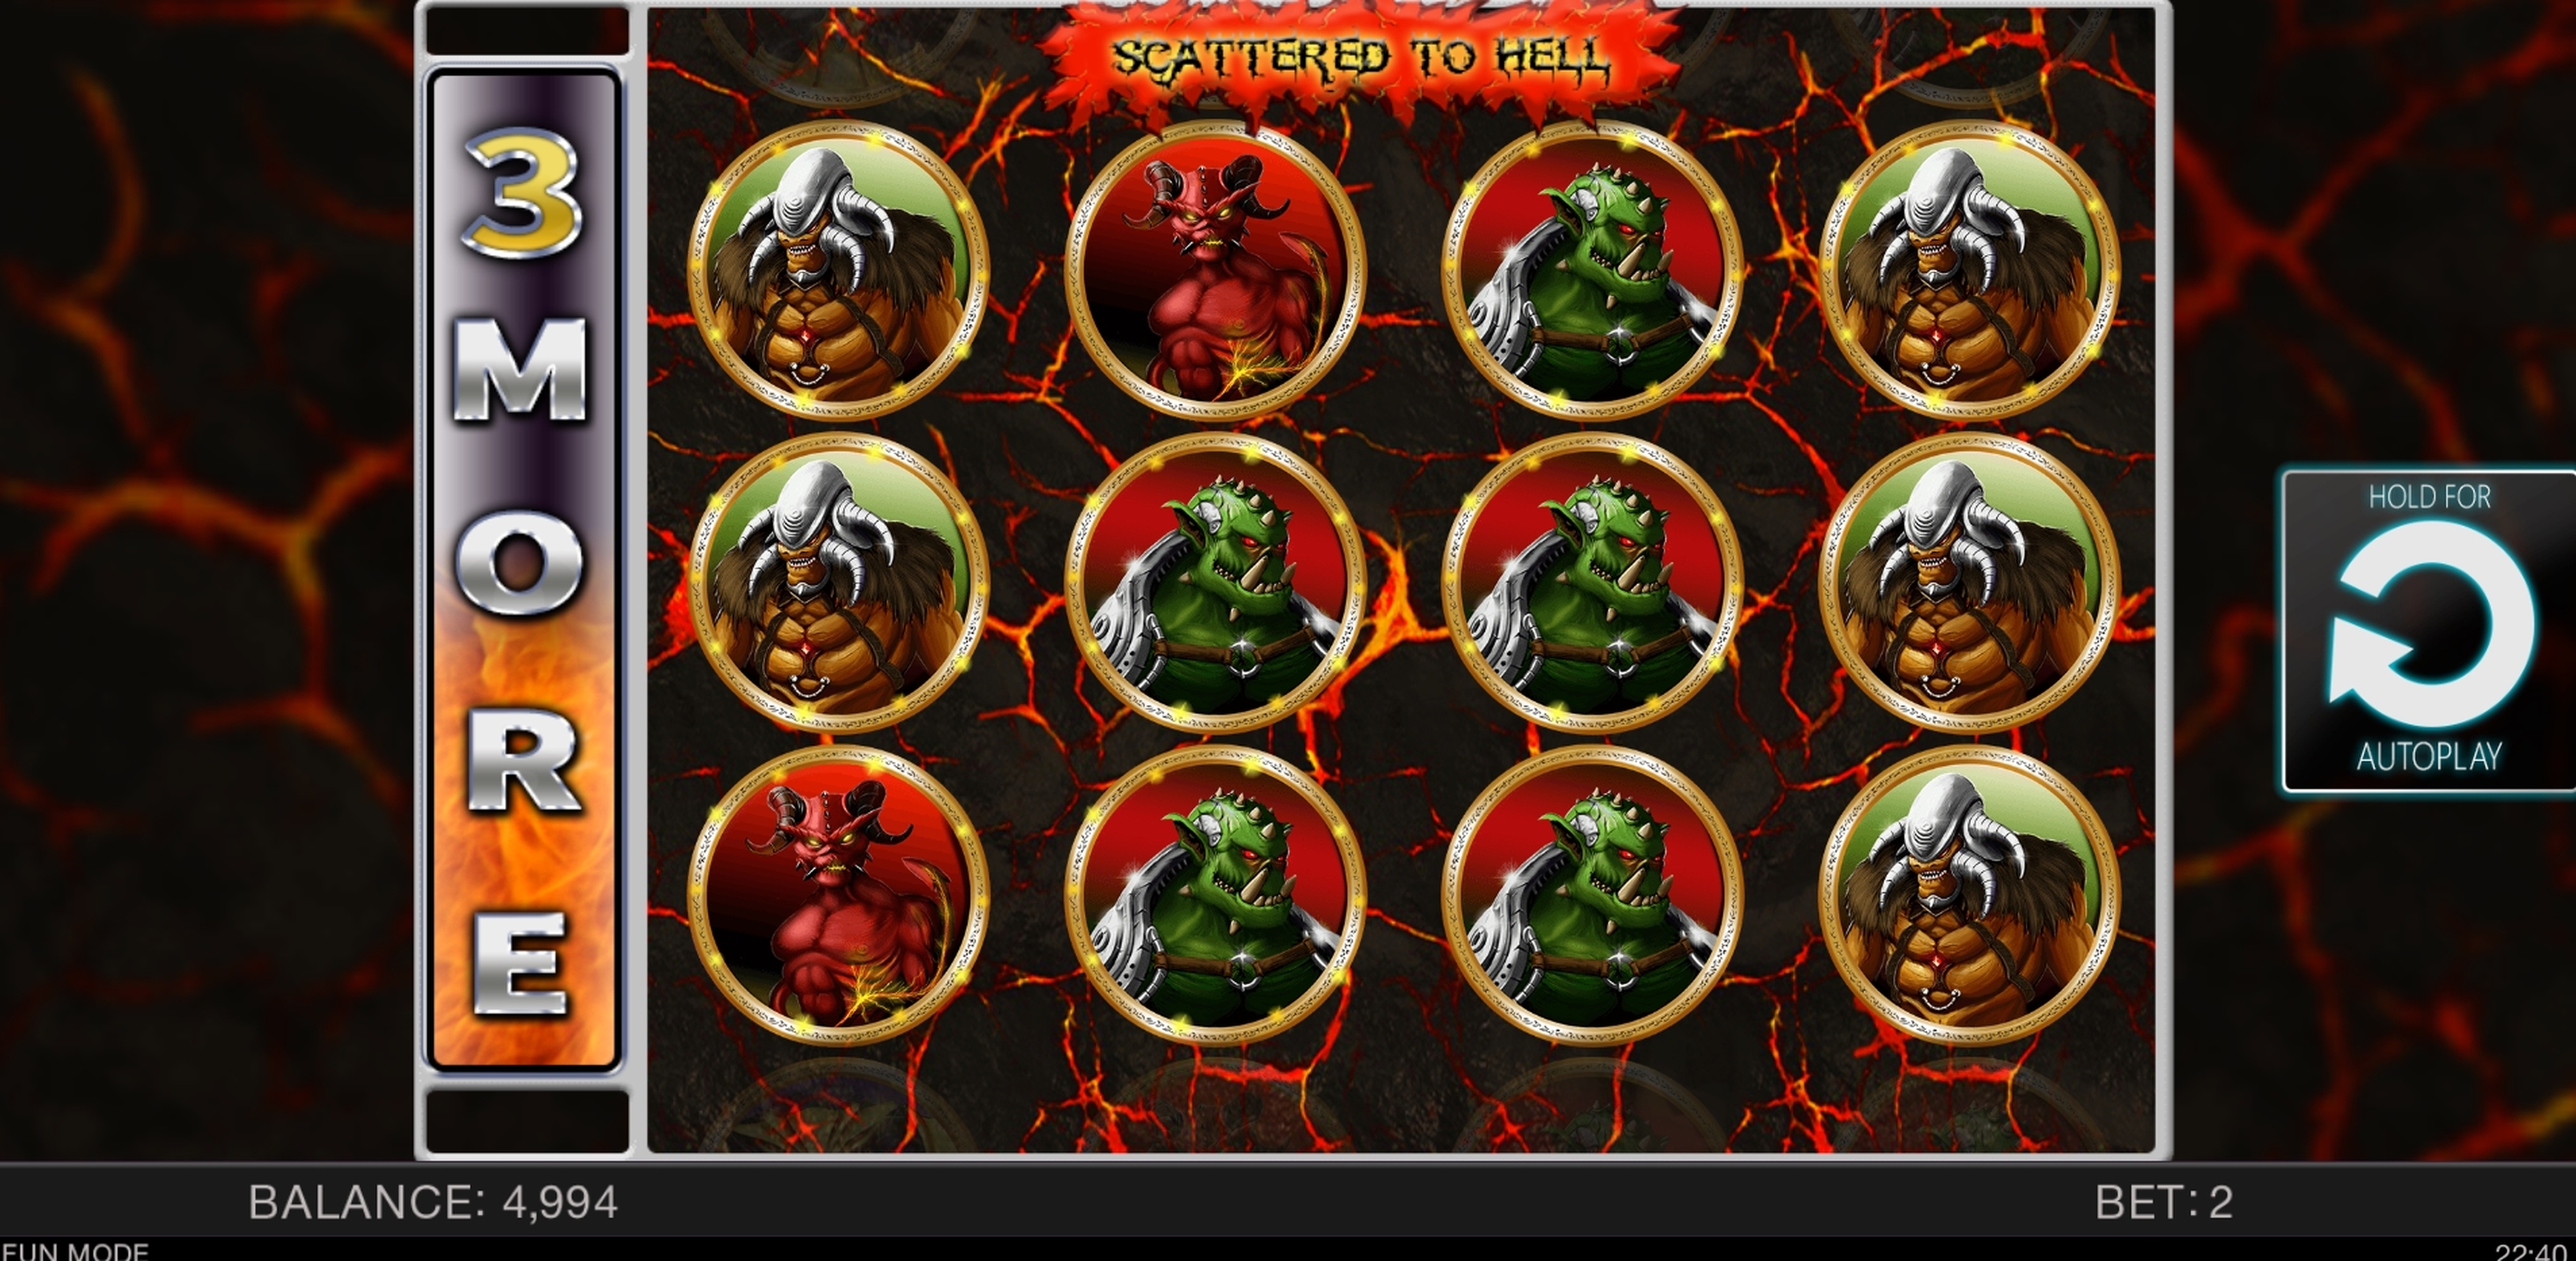 Win Money in Scattered to hell Free Slot Game by Spinomenal